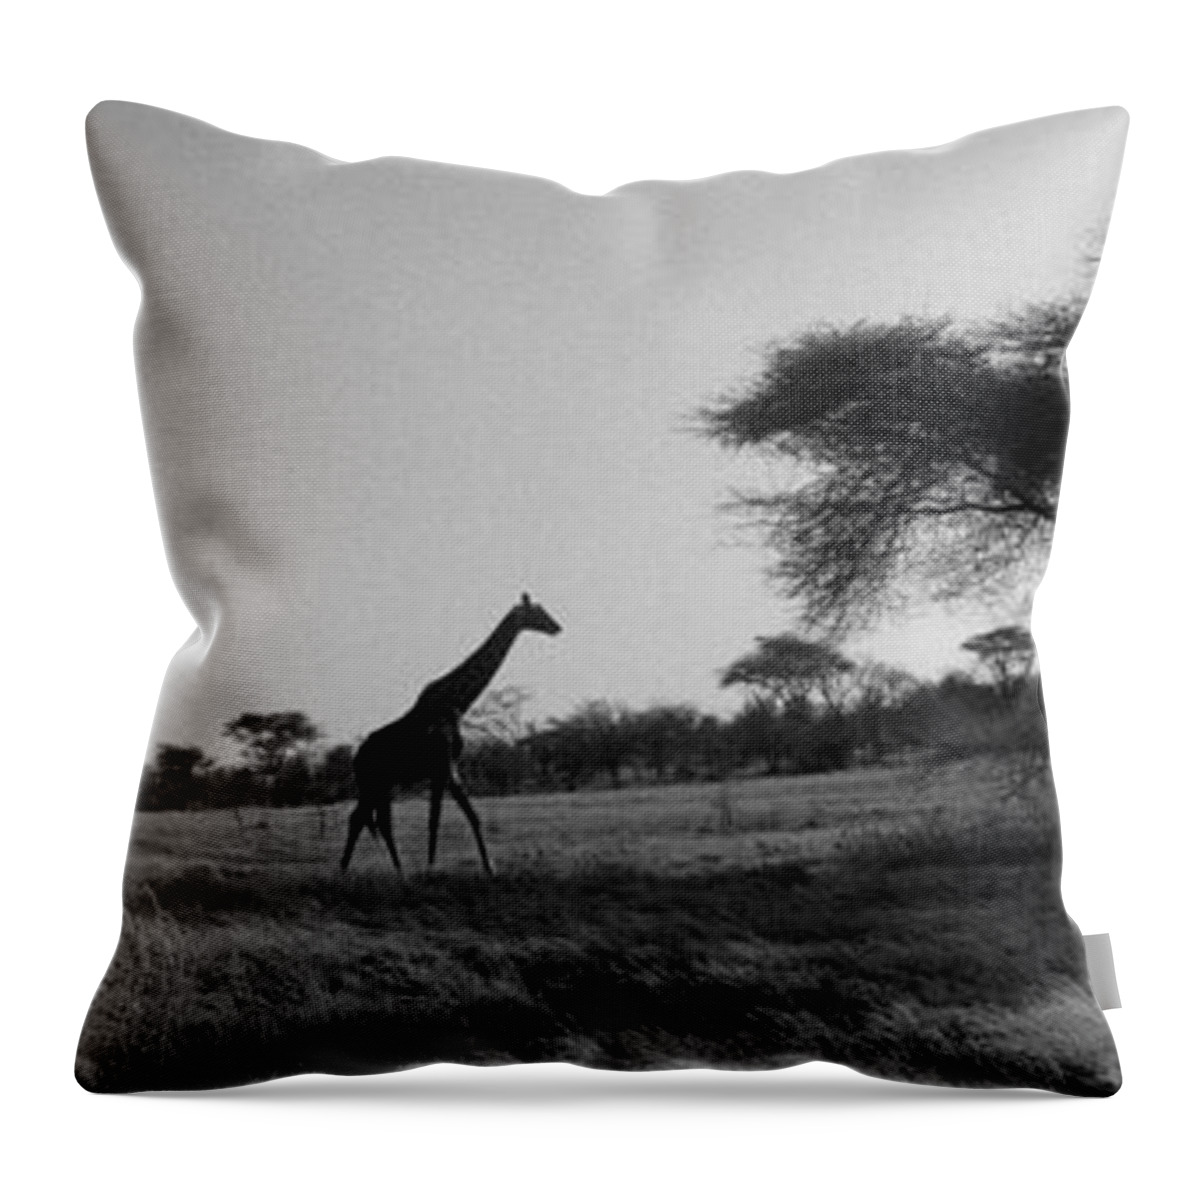 Photography Throw Pillow featuring the photograph Giraffe On The Plains, Kenya, Africa by Panoramic Images